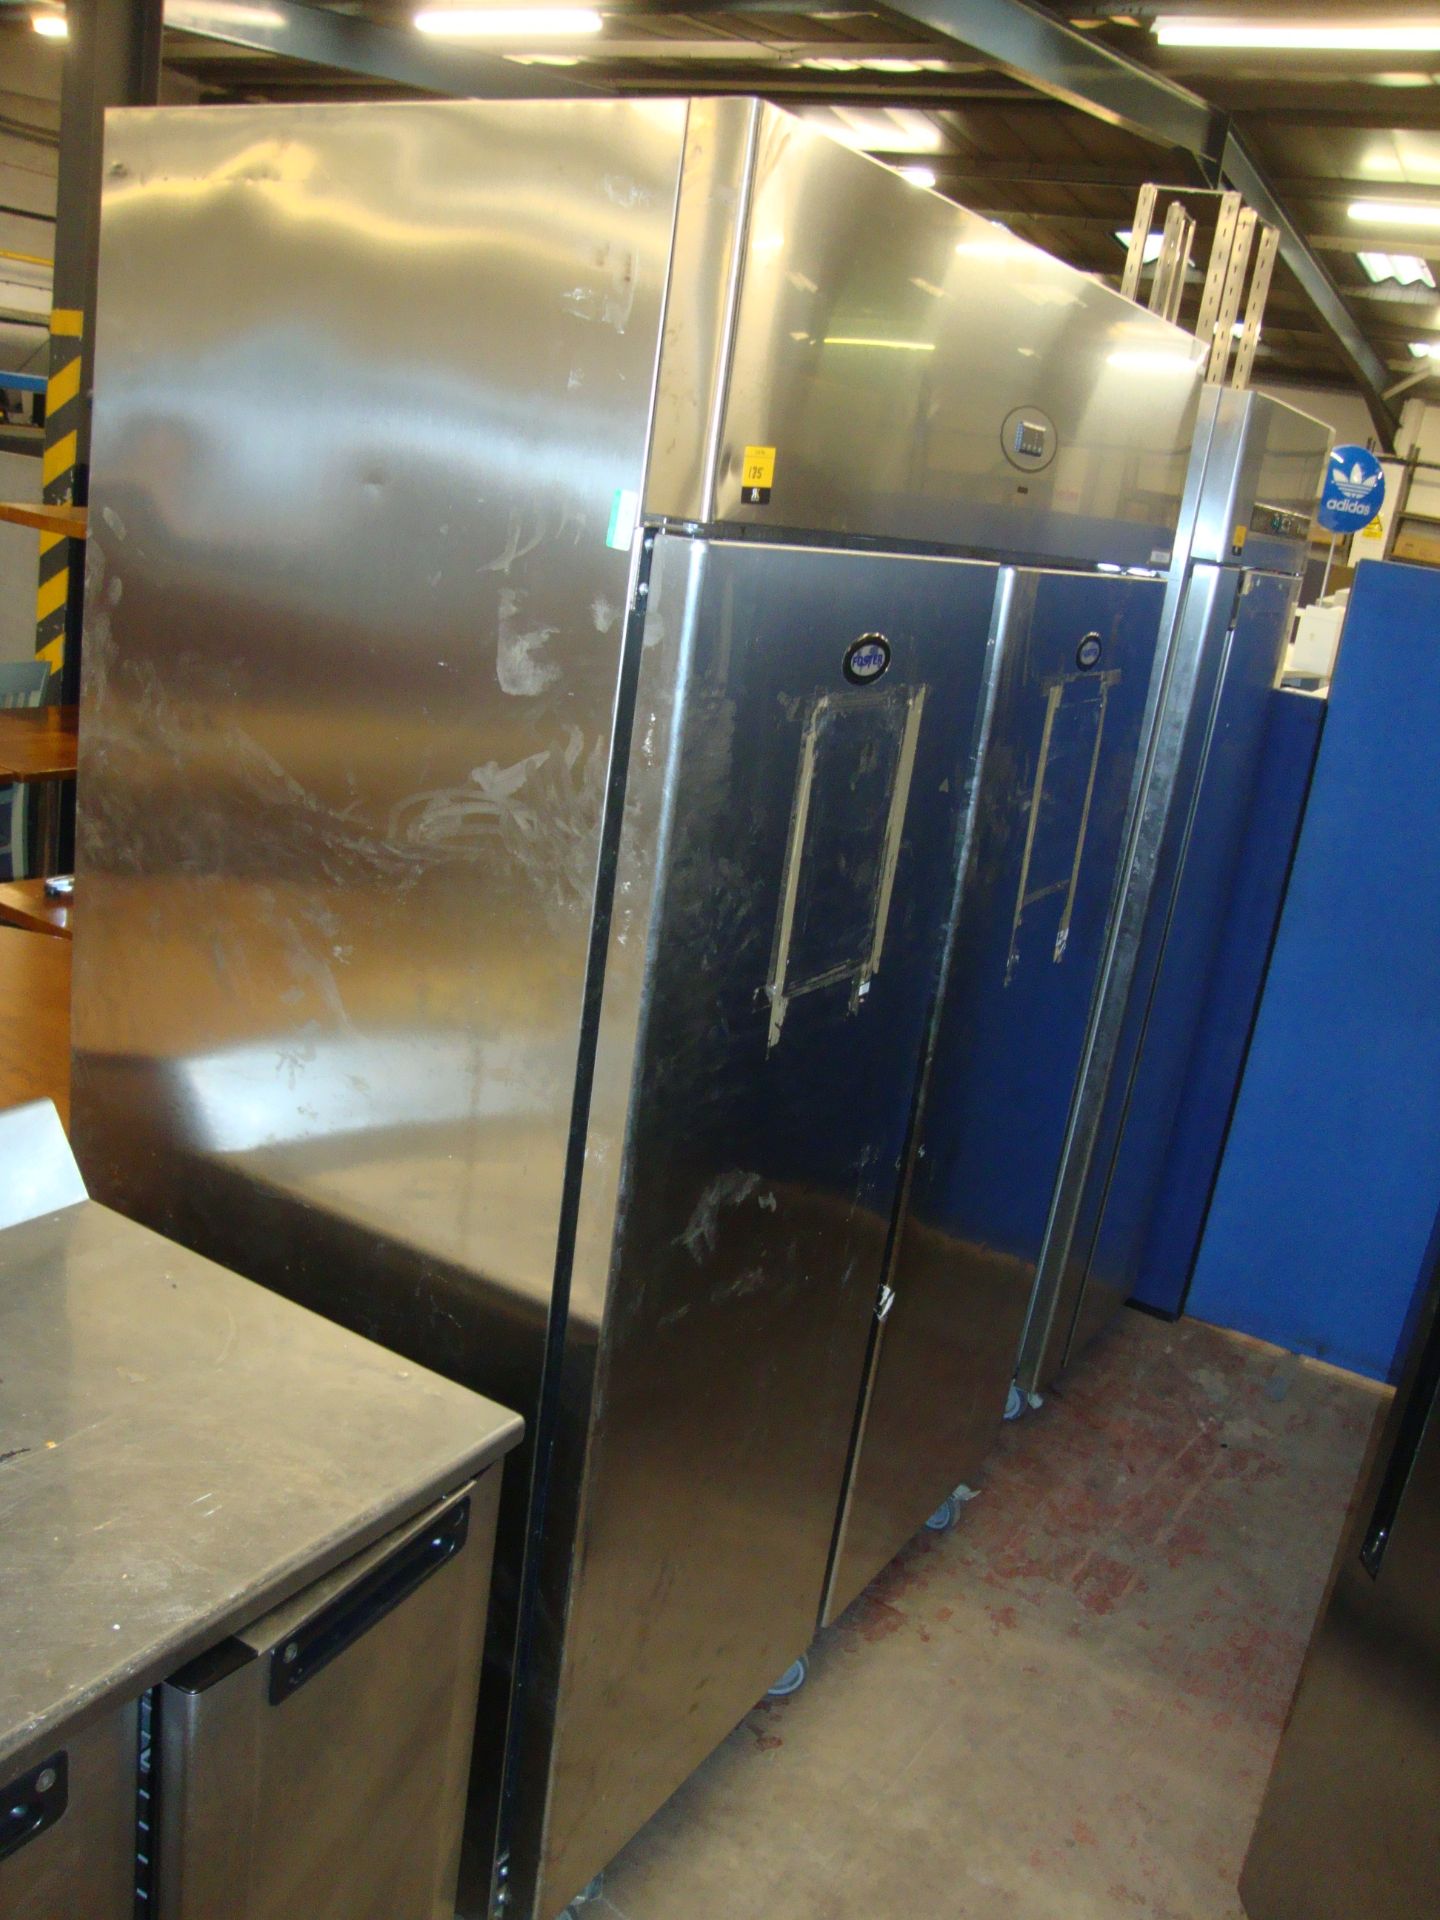 Foster large stainless steel mobile twin door freezer, model PROG1350L-A